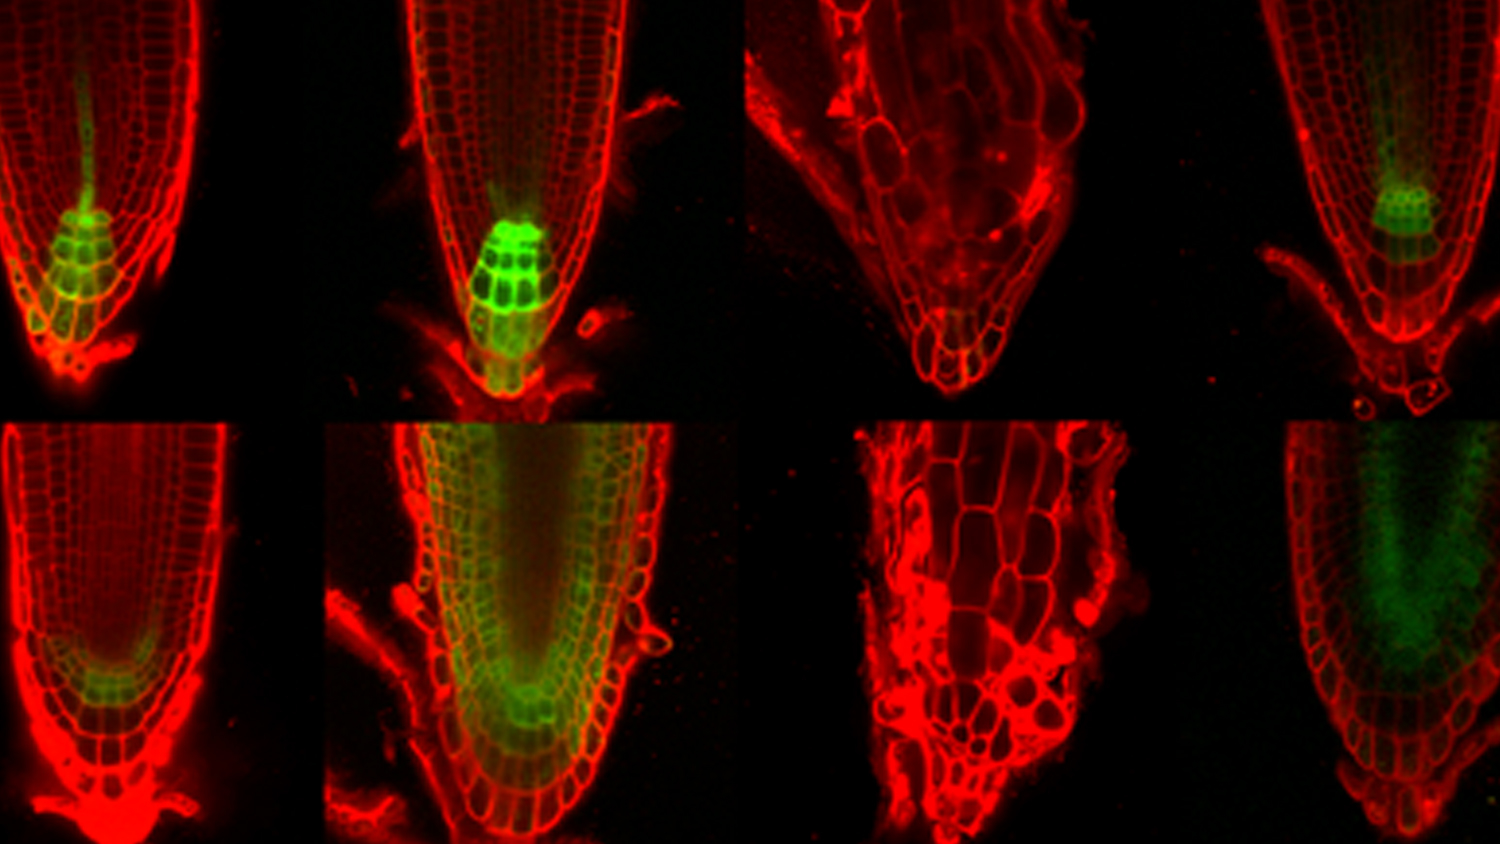 Microscopy images of plant roots.